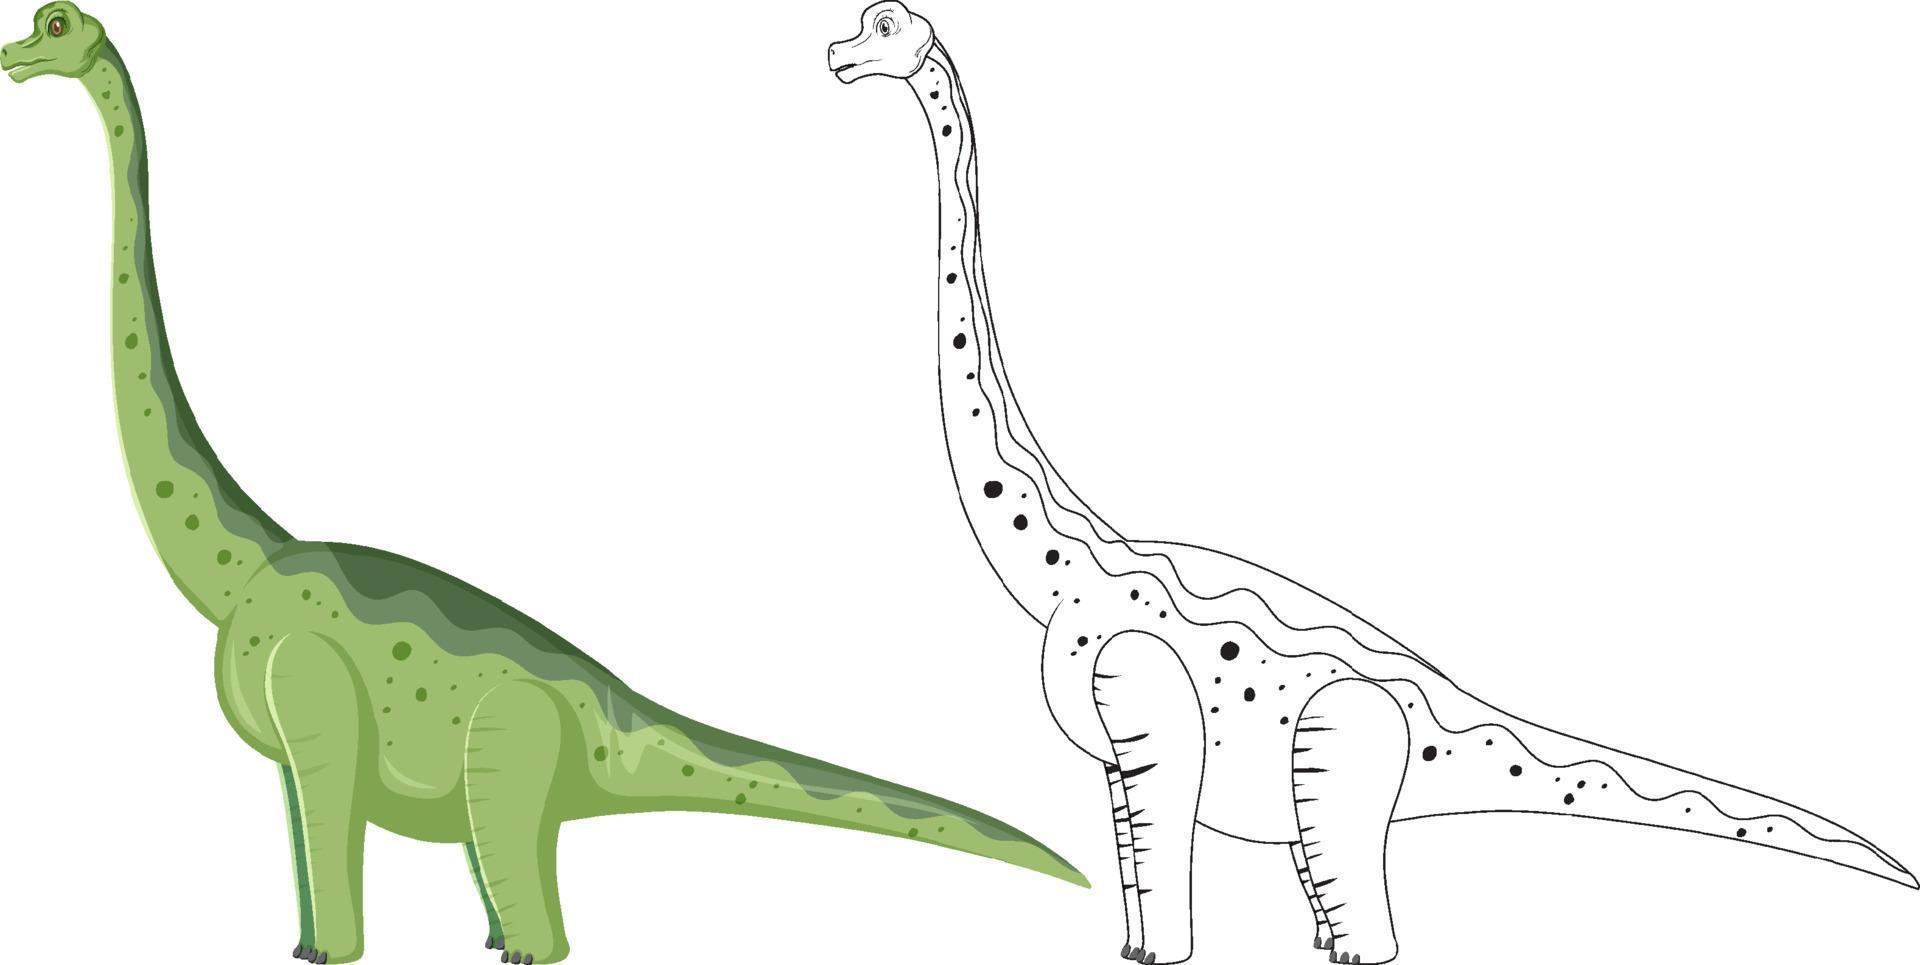 Brachiosaurus dinosaur with its doodle outline on white background vector